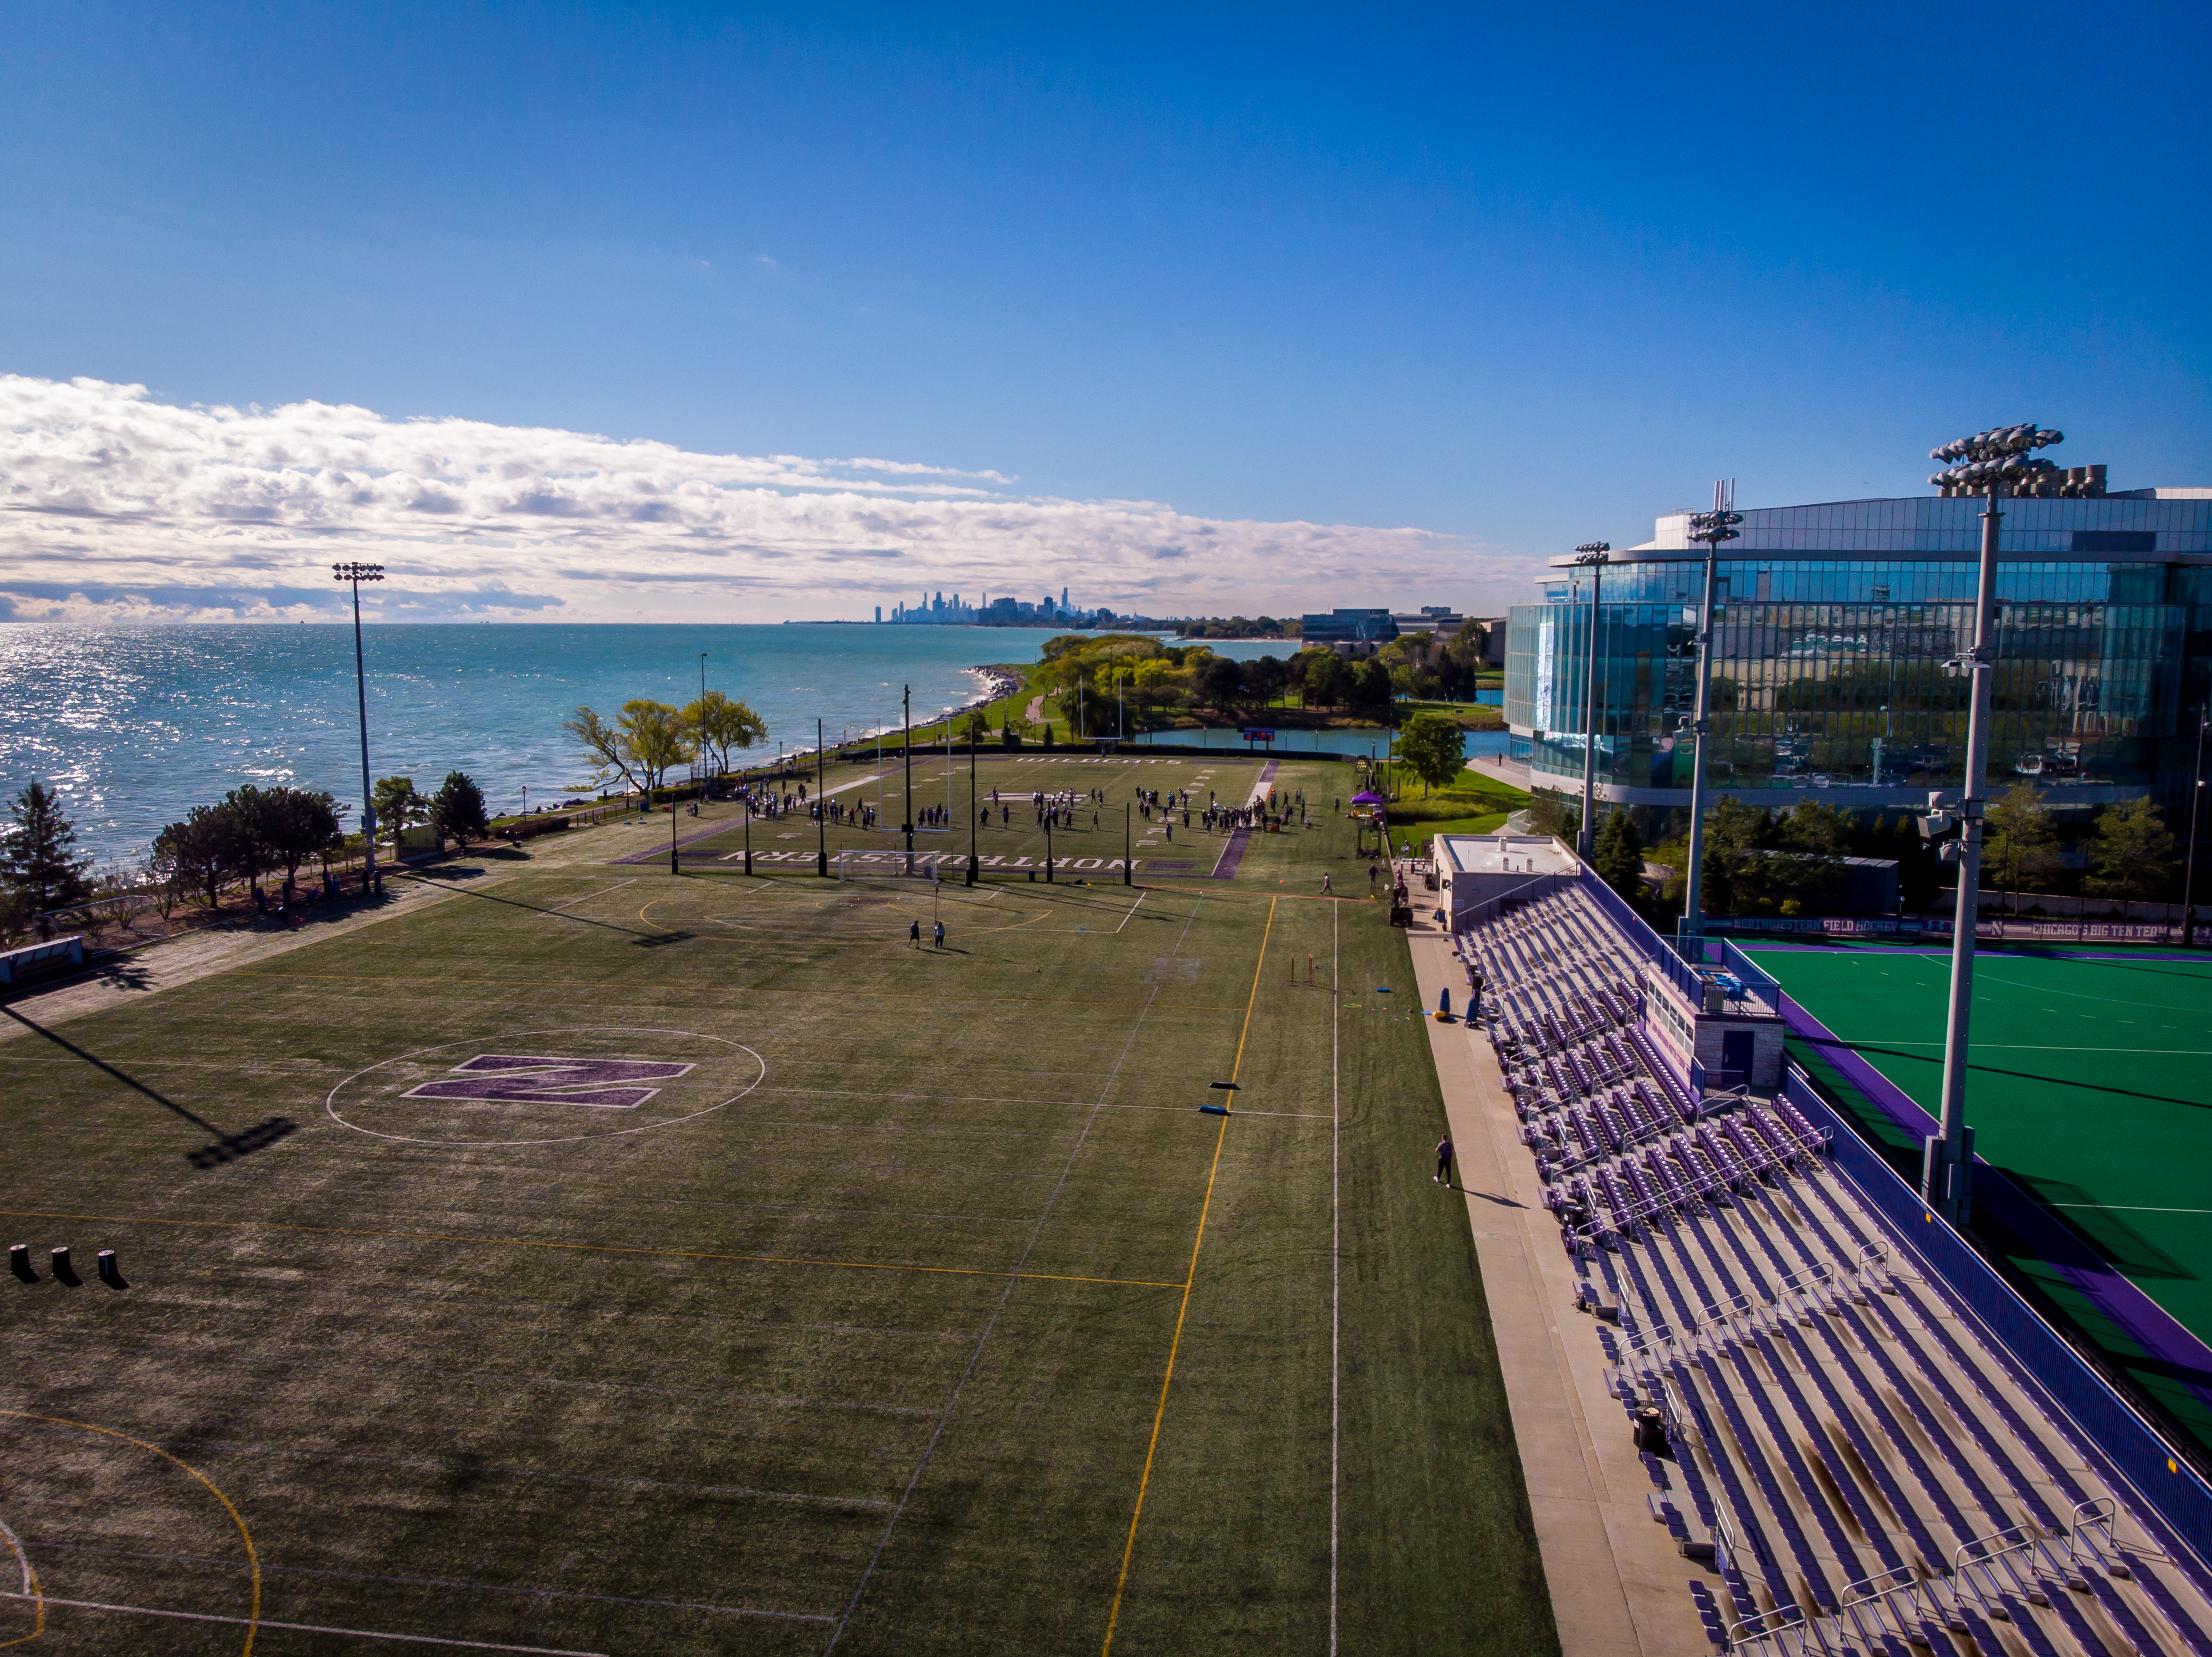 As Northwestern works to rebuild Ryan Field, the university will build a temporary field on the Evanston campus for football, soccer, lacrosse games.